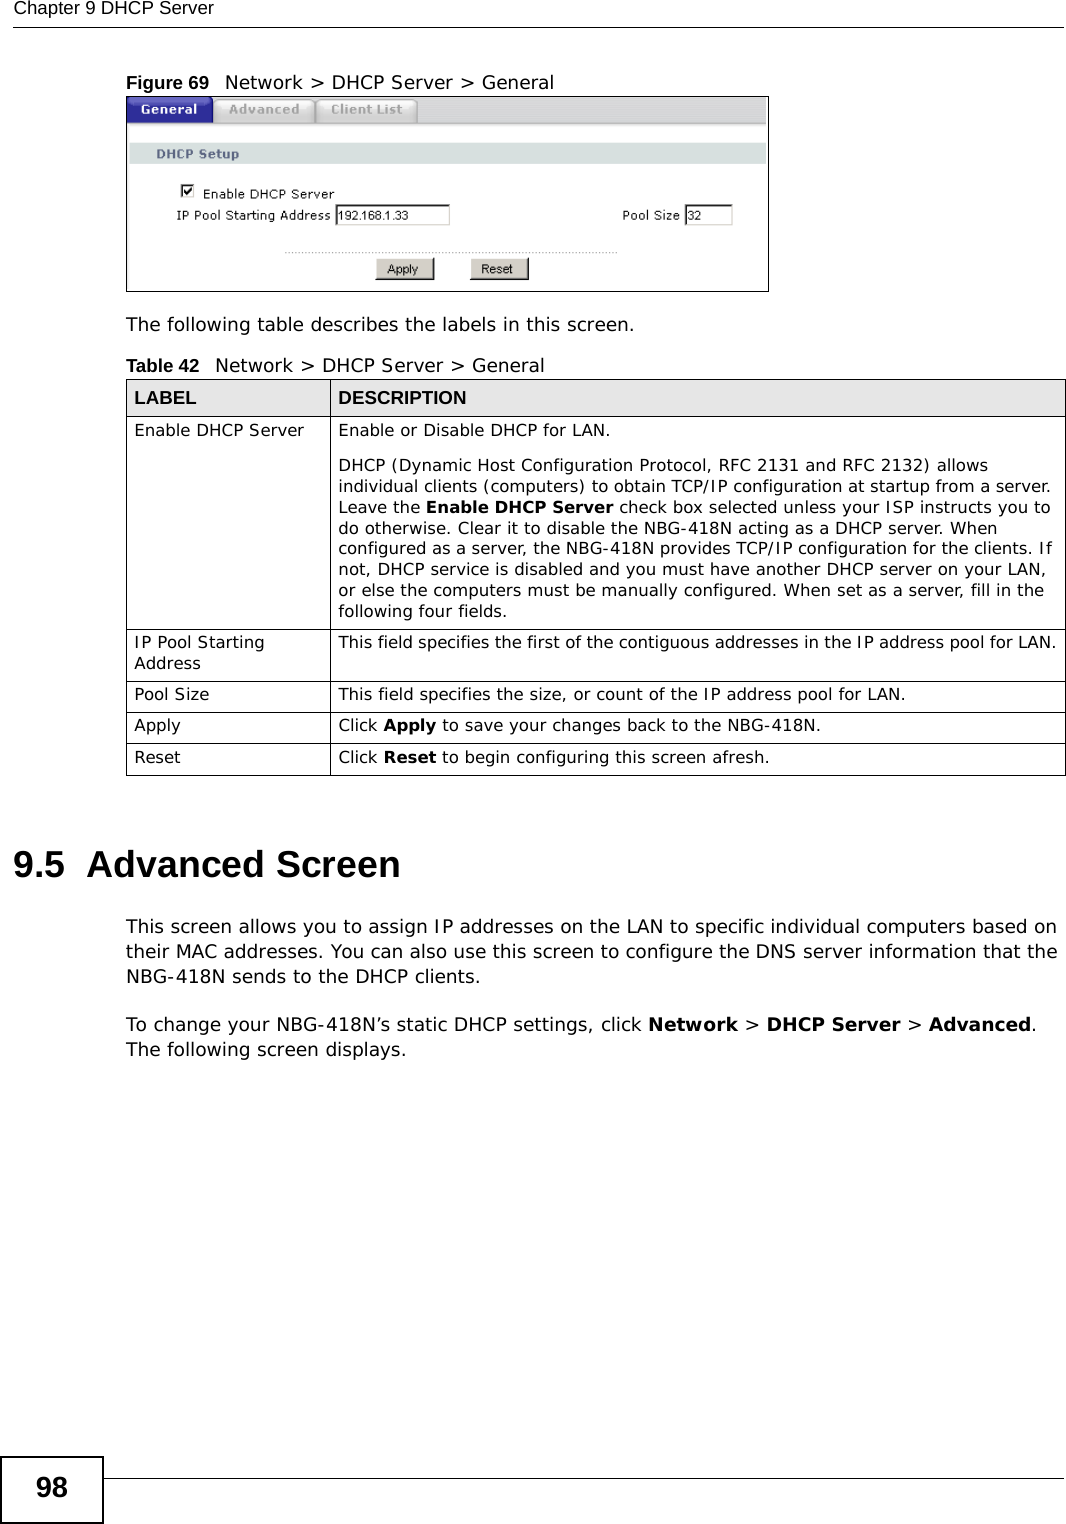 Chapter 9 DHCP Server98Figure 69   Network &gt; DHCP Server &gt; General   The following table describes the labels in this screen.9.5  Advanced Screen    This screen allows you to assign IP addresses on the LAN to specific individual computers based on their MAC addresses. You can also use this screen to configure the DNS server information that the NBG-418N sends to the DHCP clients.To change your NBG-418N’s static DHCP settings, click Network &gt; DHCP Server &gt; Advanced. The following screen displays.Table 42   Network &gt; DHCP Server &gt; GeneralLABEL DESCRIPTIONEnable DHCP Server Enable or Disable DHCP for LAN.DHCP (Dynamic Host Configuration Protocol, RFC 2131 and RFC 2132) allows individual clients (computers) to obtain TCP/IP configuration at startup from a server. Leave the Enable DHCP Server check box selected unless your ISP instructs you to do otherwise. Clear it to disable the NBG-418N acting as a DHCP server. When configured as a server, the NBG-418N provides TCP/IP configuration for the clients. If not, DHCP service is disabled and you must have another DHCP server on your LAN, or else the computers must be manually configured. When set as a server, fill in the following four fields.IP Pool Starting Address This field specifies the first of the contiguous addresses in the IP address pool for LAN.Pool Size This field specifies the size, or count of the IP address pool for LAN.Apply Click Apply to save your changes back to the NBG-418N.Reset Click Reset to begin configuring this screen afresh.